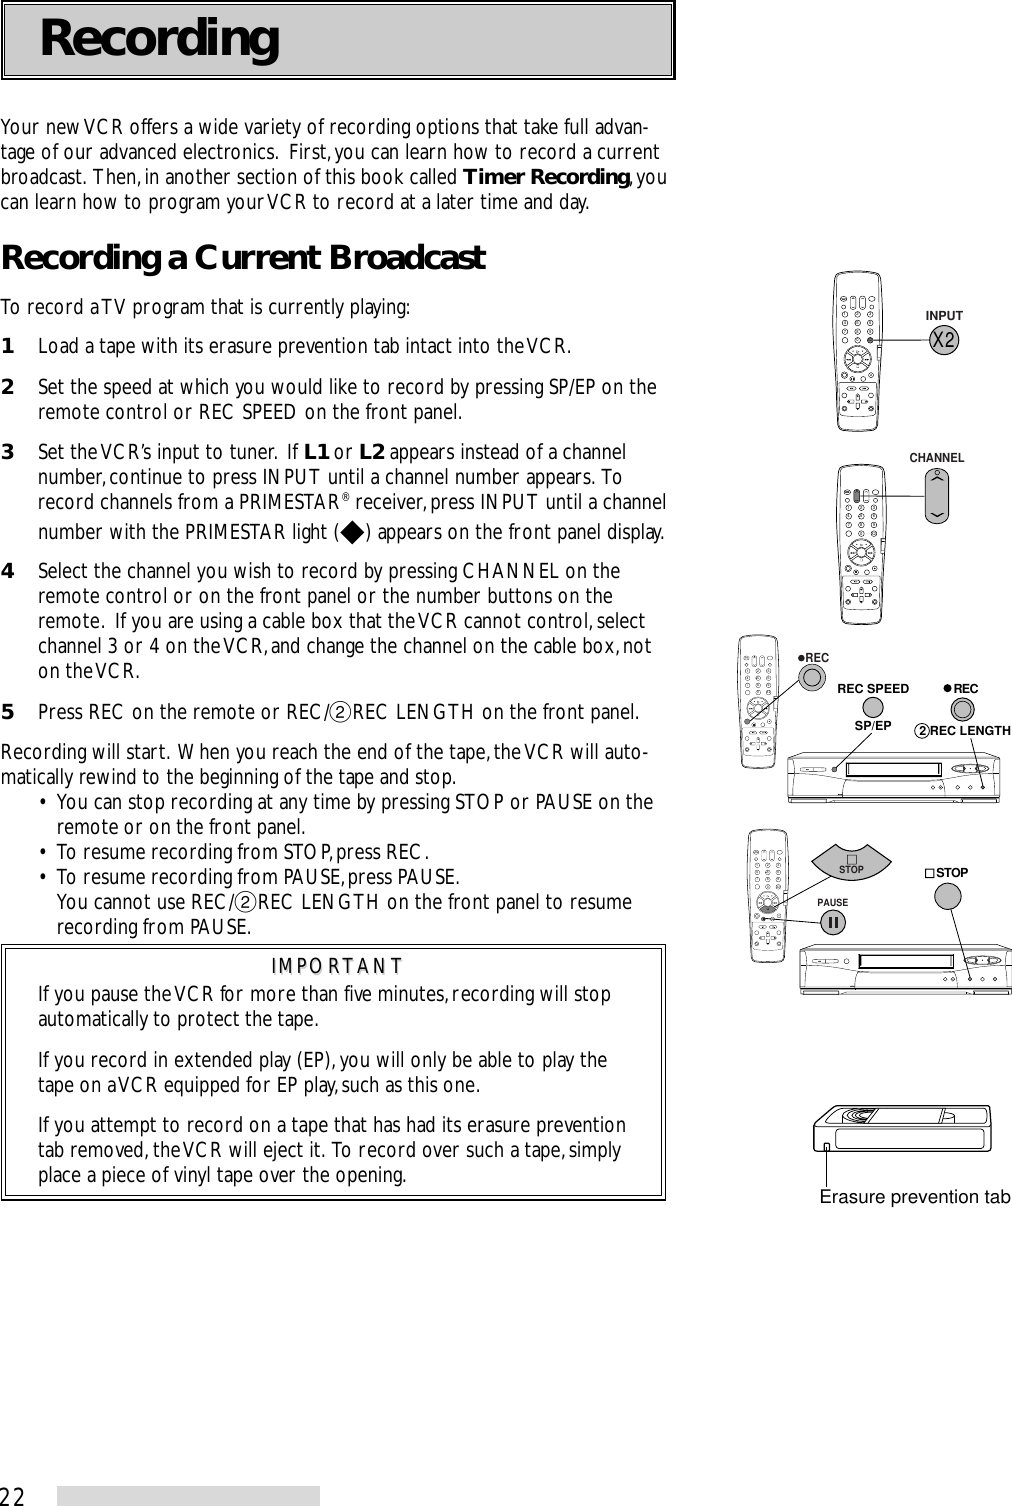 22Your new VCR offers a wide variety of recording options that take full advan-tage of our advanced electronics.  First, you can learn how to record a currentbroadcast.  Then, in another section of this book called Timer Recording, youcan learn how to program your VCR to record at a later time and day.Recording a Current BroadcastTo record a TV program that is currently playing:1Load a tape with its erasure prevention tab intact into the VCR.2Set the speed at which you would like to record by pressing SP/EP on theremote control or REC SPEED on the front panel.3Set the VCR’s input to tuner.  If L1 or L2 appears instead of a channelnumber, continue to press INPUT until a channel number appears.  Torecord channels from a PRIMESTAR® receiver, press INPUT until a channelnumber with the PRIMESTAR light ( ) appears on the front panel display.4Select the channel you wish to record by pressing CHANNEL on theremote control or on the front panel or the number buttons on theremote.  If you are using a cable box that the VCR cannot control, selectchannel 3 or 4 on the VCR, and change the channel on the cable box, noton the VCR.5Press REC on the remote or REC/˙REC LENGTH on the front panel.Recording will start.  When you reach the end of the tape, the VCR will auto-matically rewind to the beginning of the tape and stop.• You can stop recording at any time by pressing STOP or PAUSE on theremote or on the front panel.• To resume recording from STOP, press REC.• To resume recording from PAUSE, press PAUSE.You cannot use REC/˙REC LENGTH on the front panel to resumerecording from PAUSE.IMPORTANTIMPORTANTIf you pause the VCR for more than five minutes, recording will stopautomatically to protect the tape.If you record in extended play (EP), you will only be able to play thetape on a VCR equipped for EP play, such as this one.If you attempt to record on a tape that has had its erasure preventiontab removed, the VCR will eject it.  To record over such a tape, simplyplace a piece of vinyl tape over the opening.Recording2135468790X 2SP/EPREC SPEED   REC2 REC LENGTH   REC2135468790X 2X 2INPUT2135468790X 2CHANNEL2135468790X 2    STOPPAUSESTOPErasure prevention tab